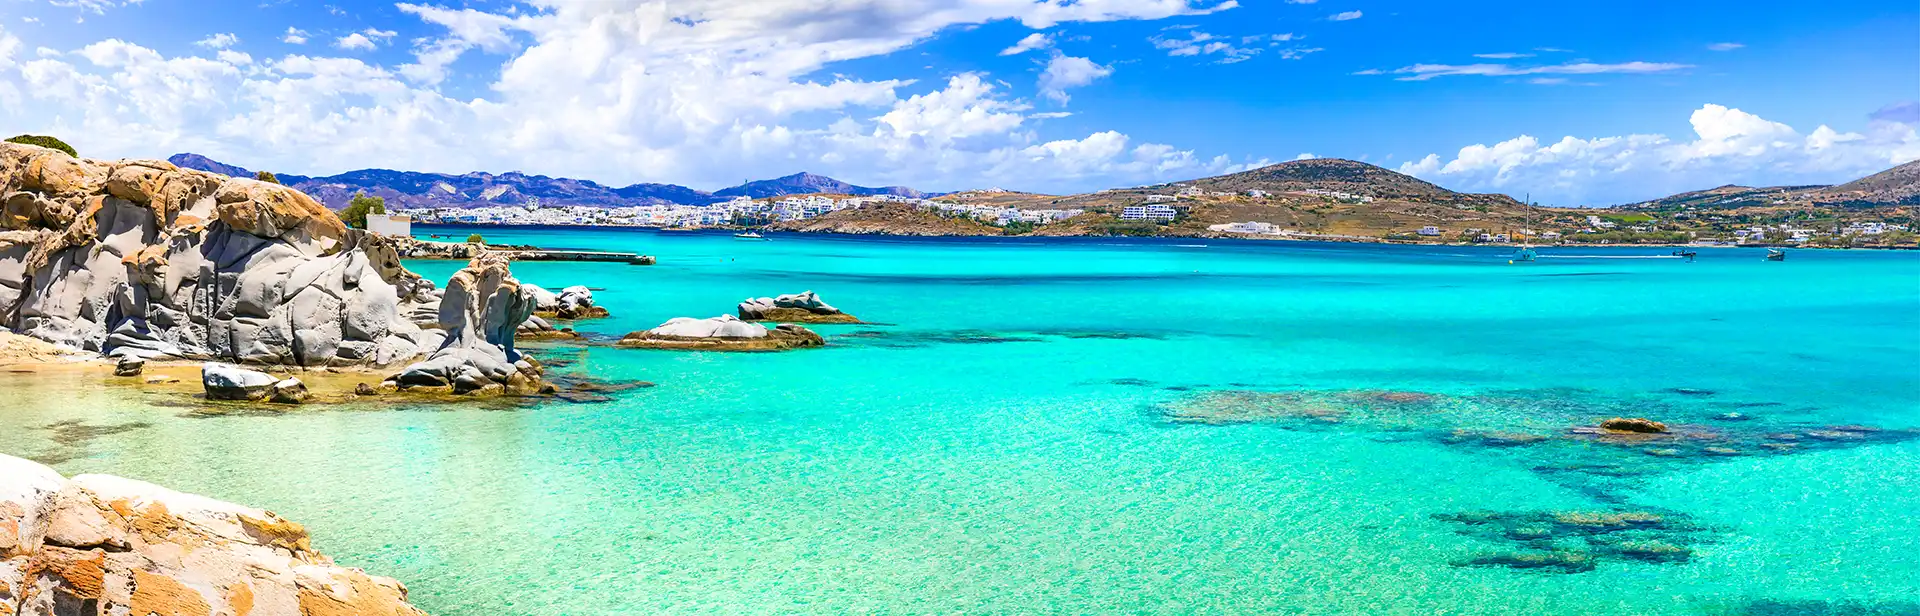 Greece sea and best beaches. Paros island. Cyclades. Kolimbithres -famous and beautiful beach in Naoussa bay3